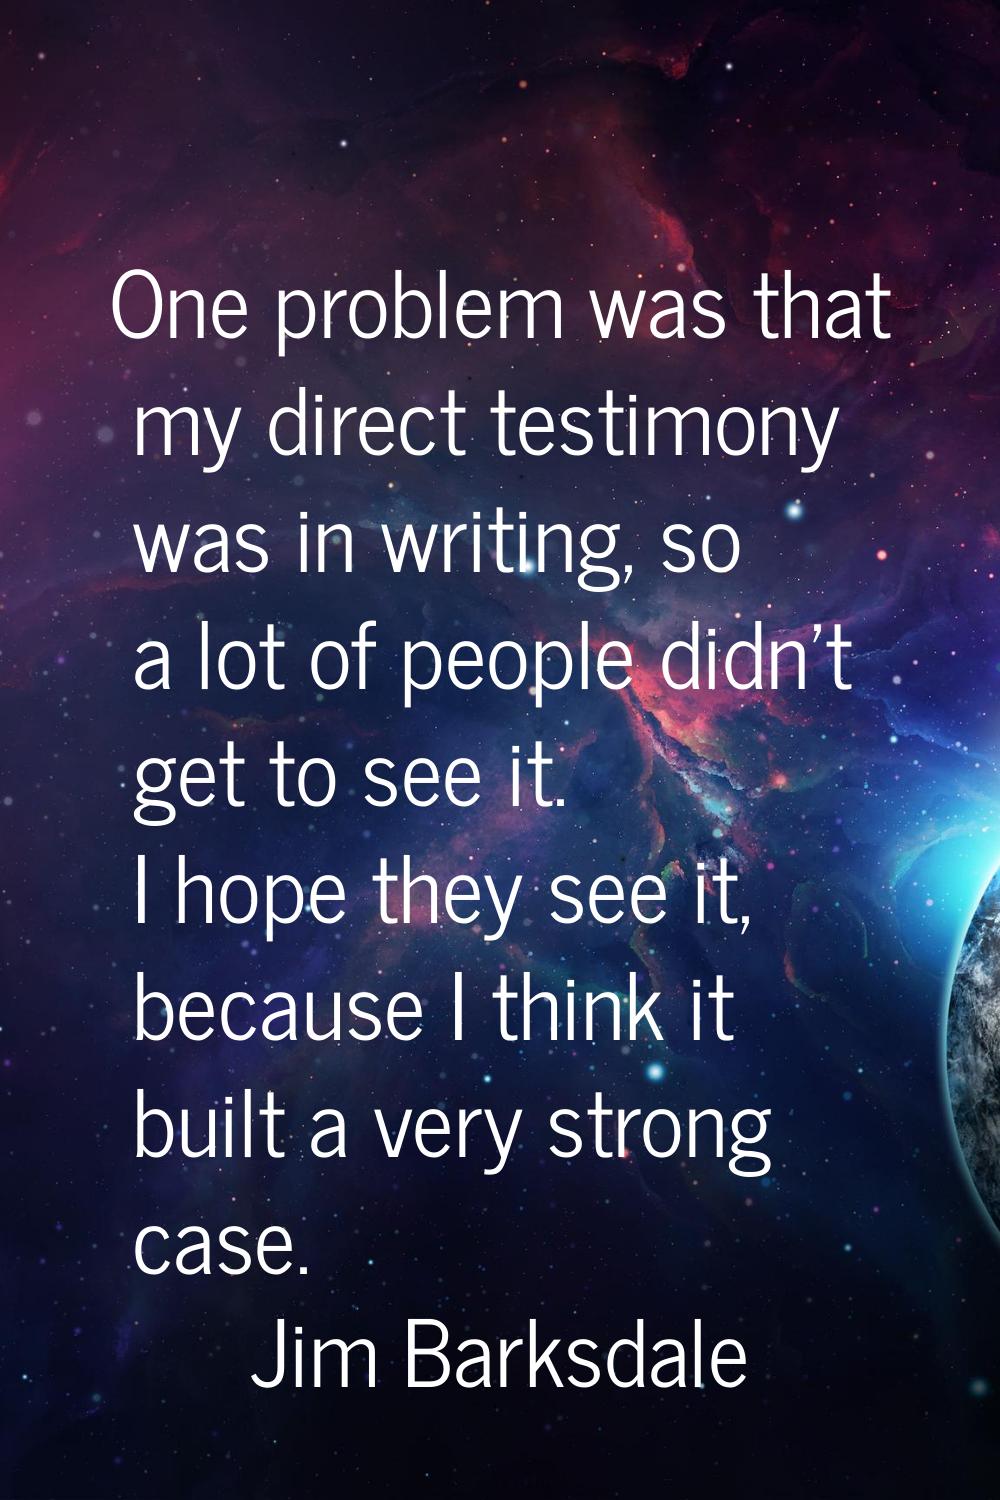 One problem was that my direct testimony was in writing, so a lot of people didn't get to see it. I